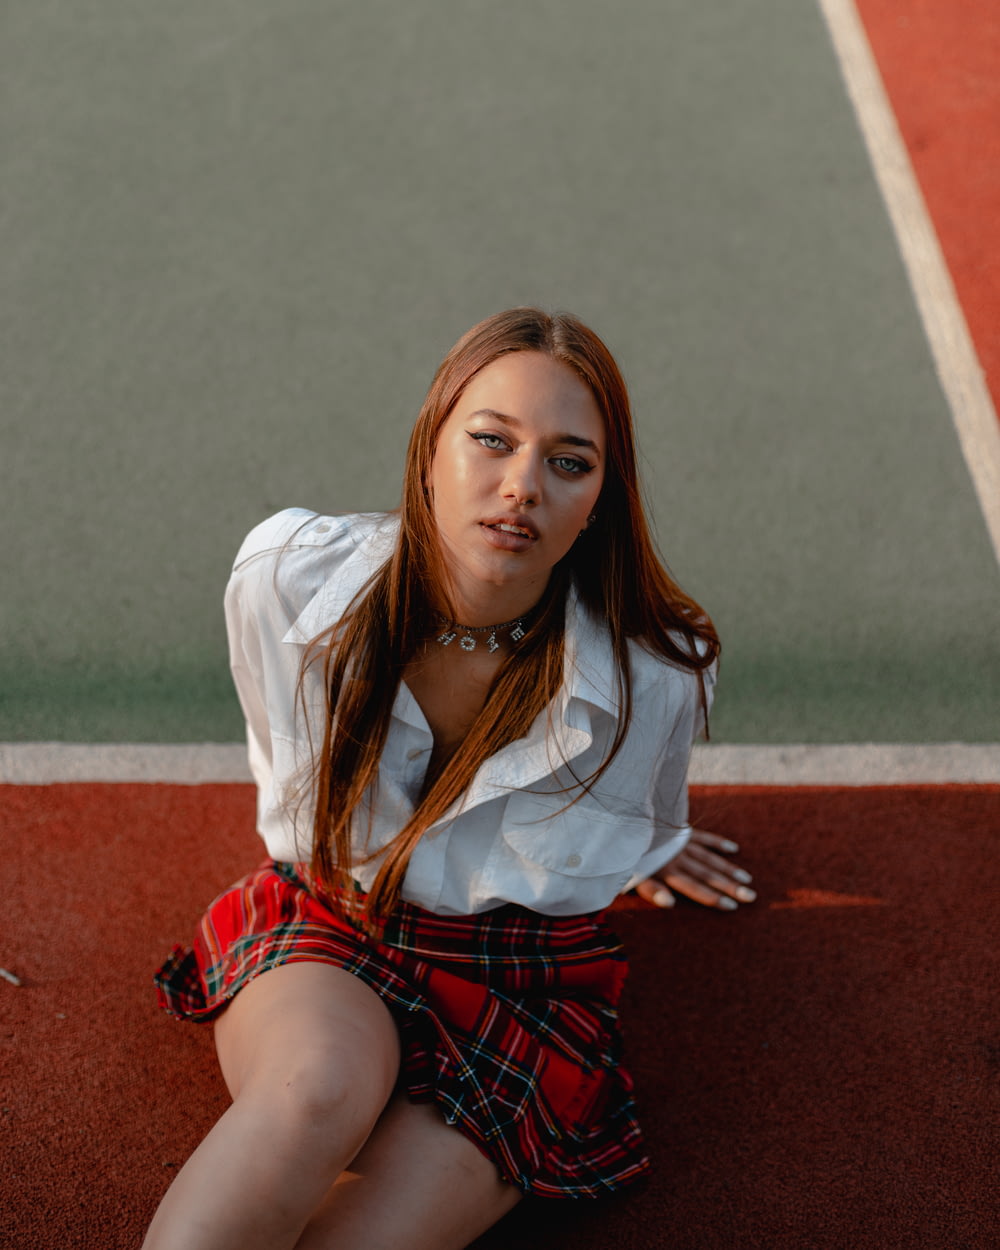 woman in white long sleeve shirt and red skirt sitting on concrete floor